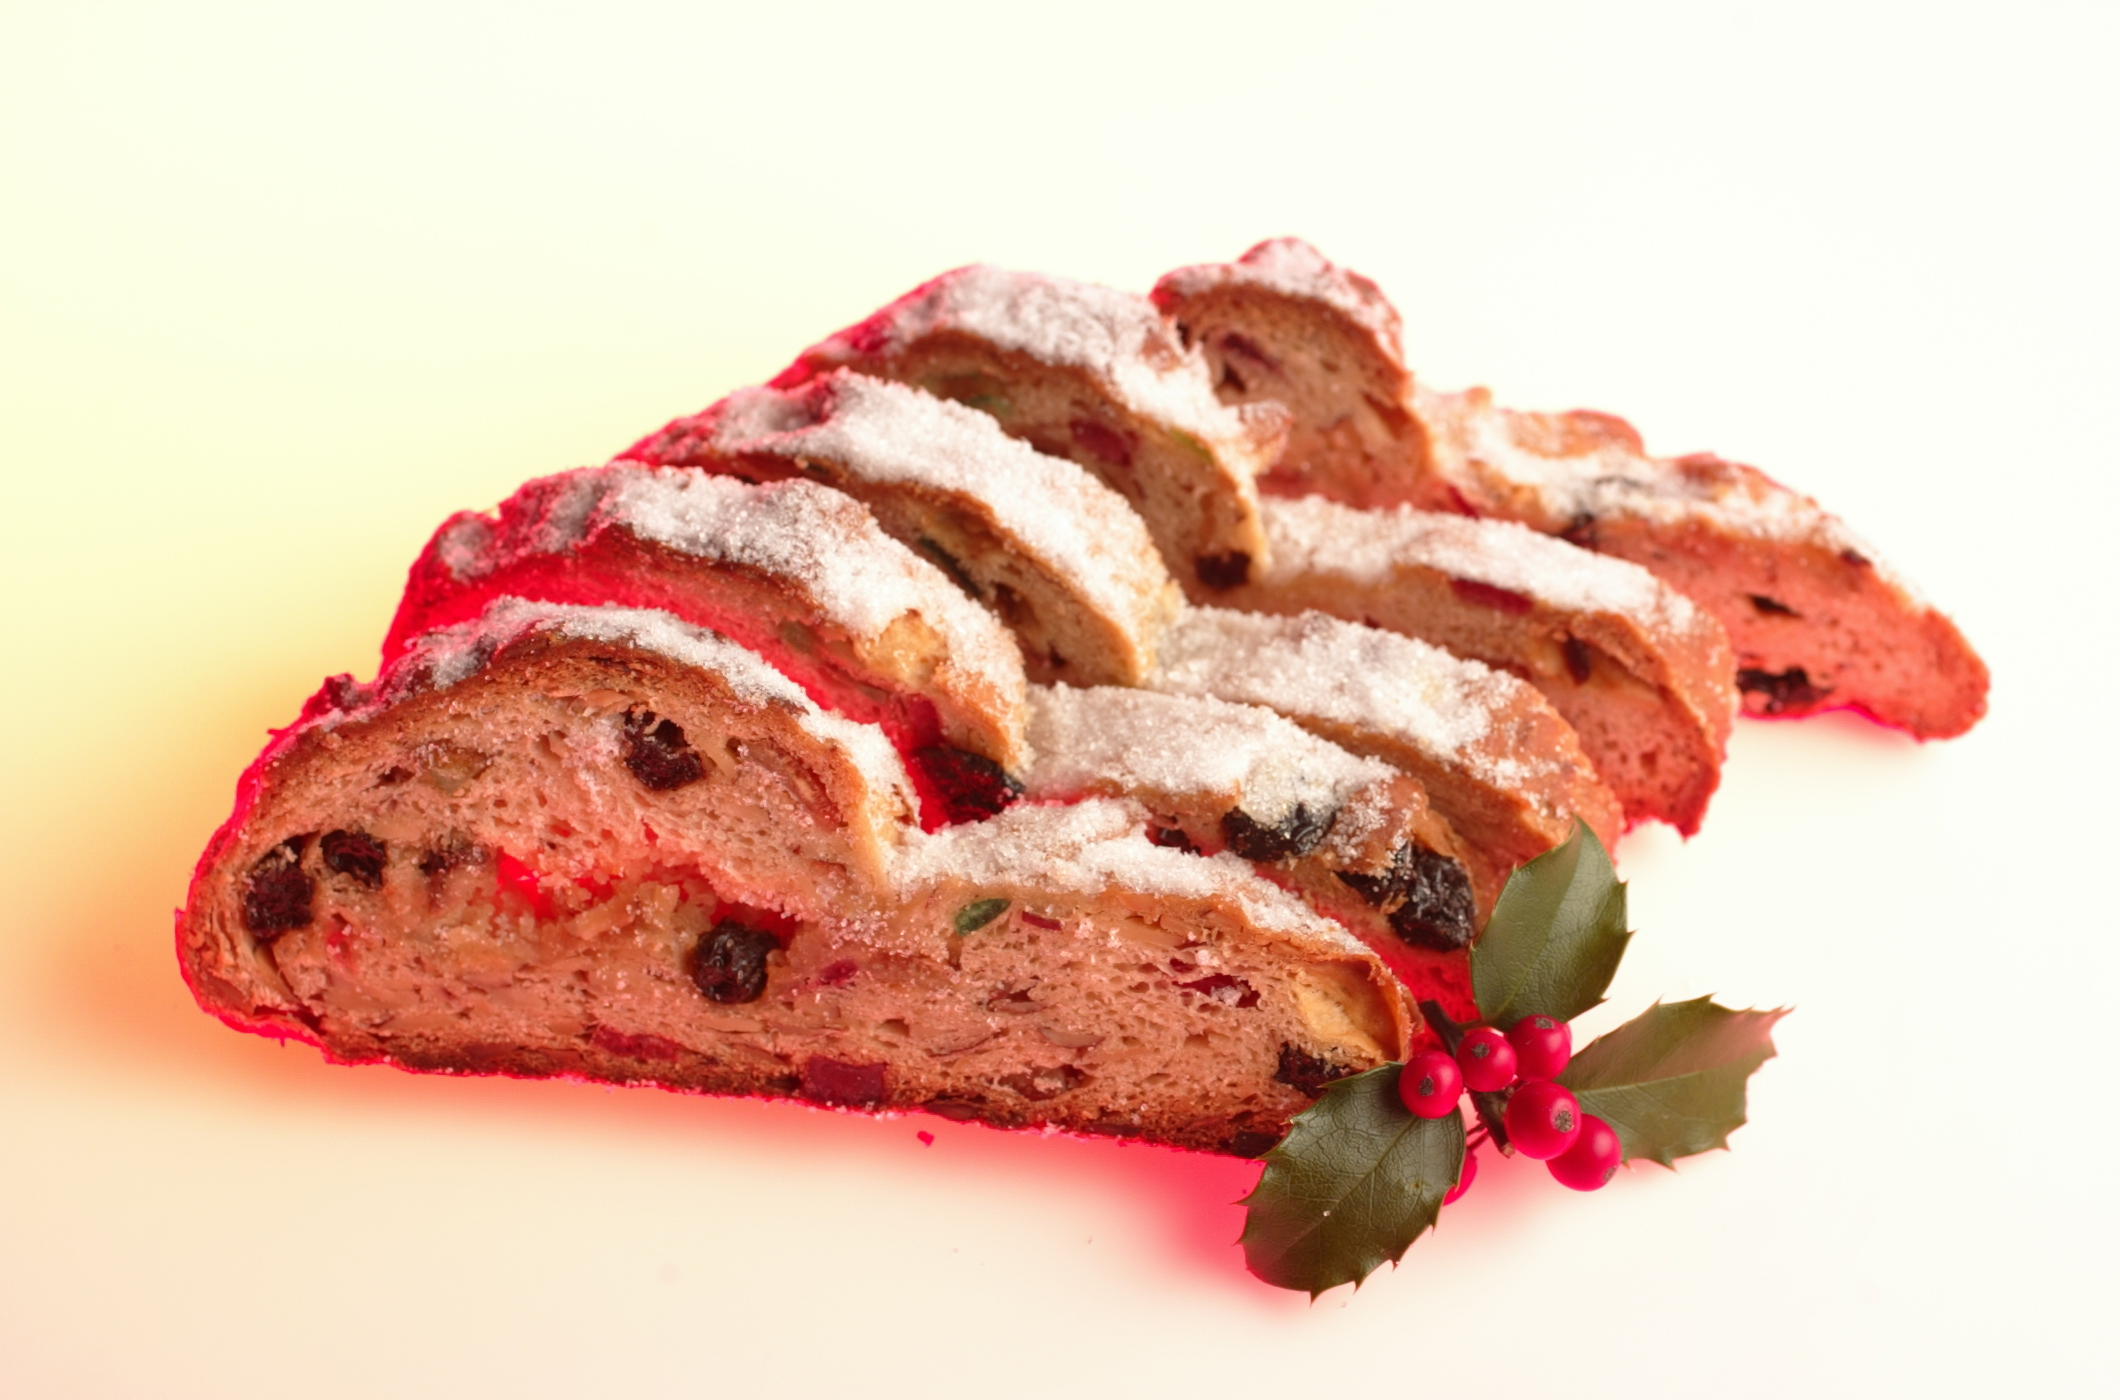 Slices of stollen with a sprig of holly.